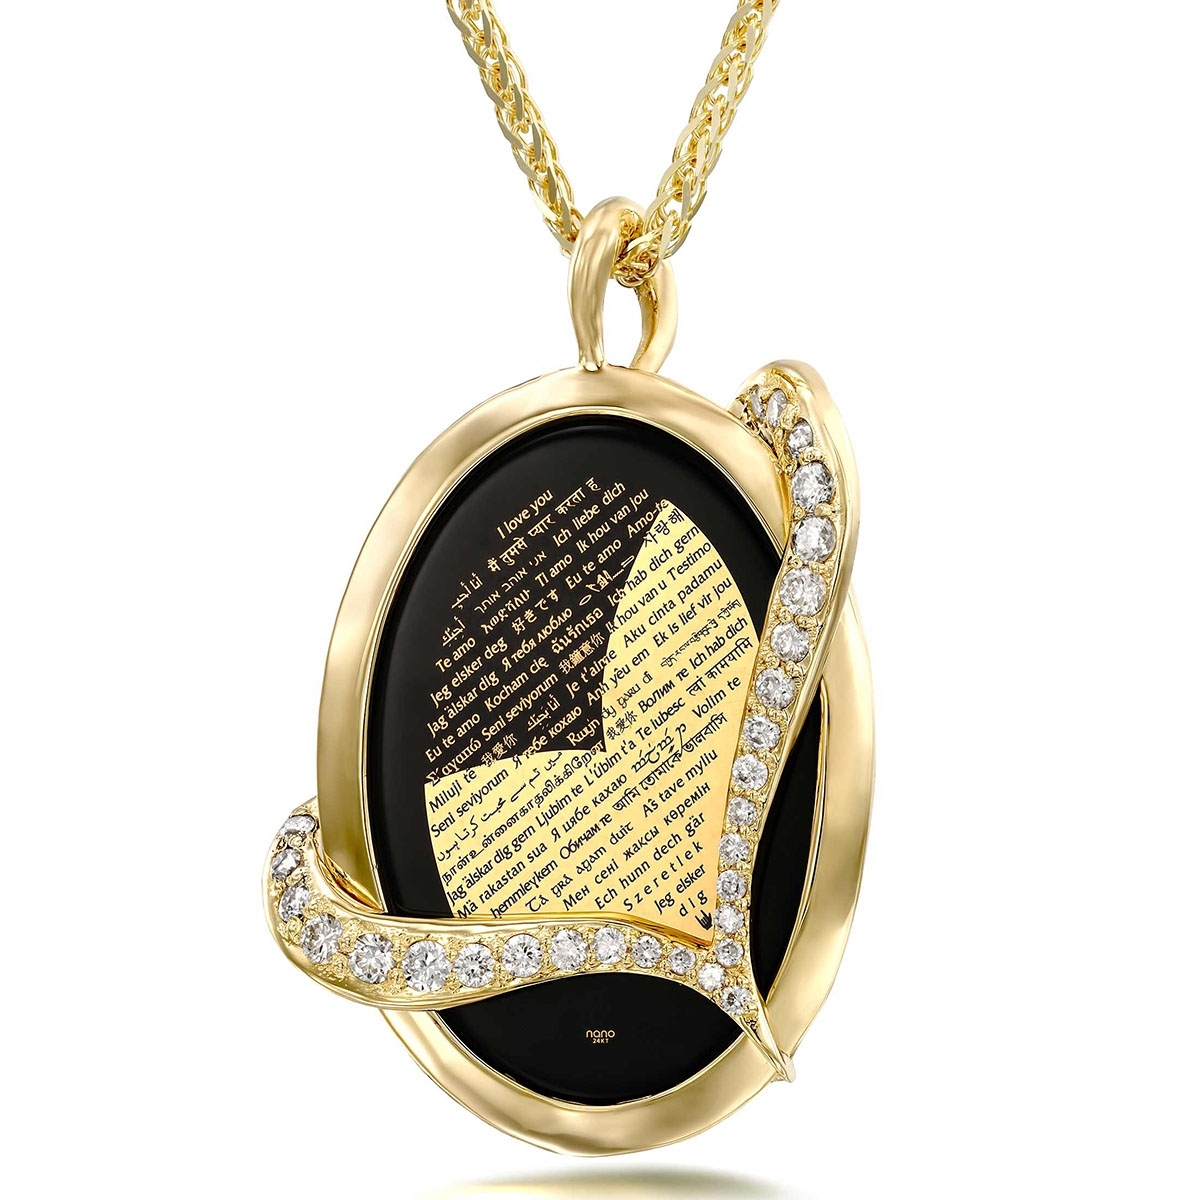 14K Gold Diamond-Accented Heart and Onyx Necklace - Micro-Inscribed in 24K Gold With "I Love You" in 60 Languages - 1